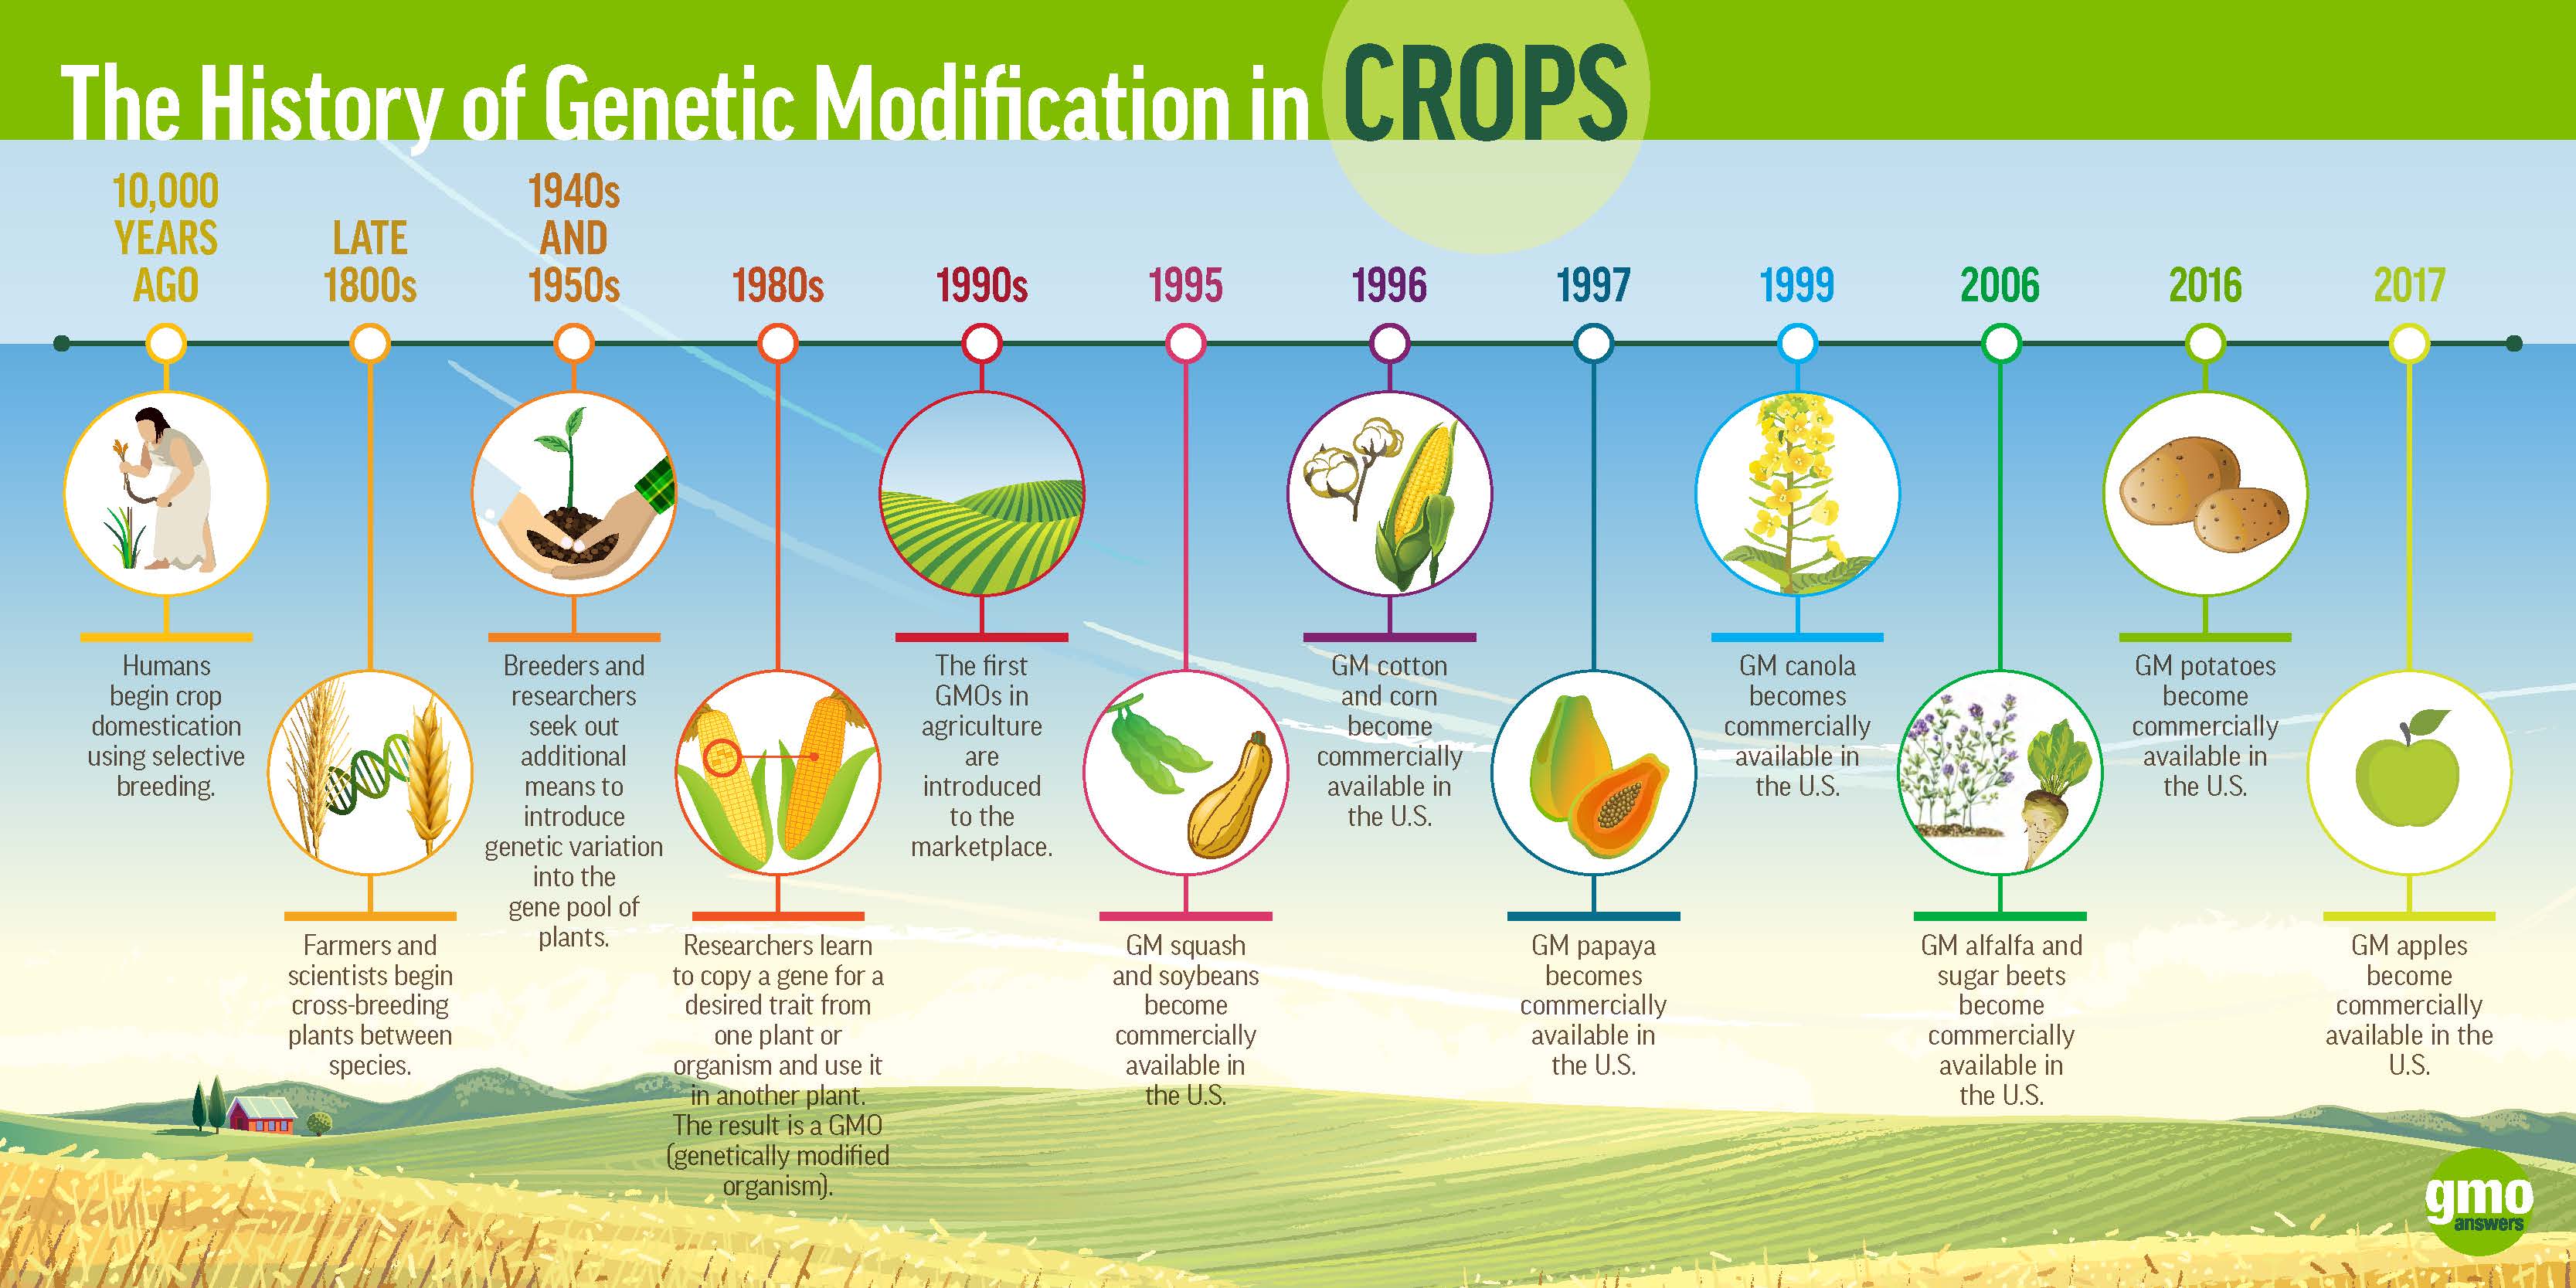 The Diagram Illustrates The Process Of Creating Genetically Modified